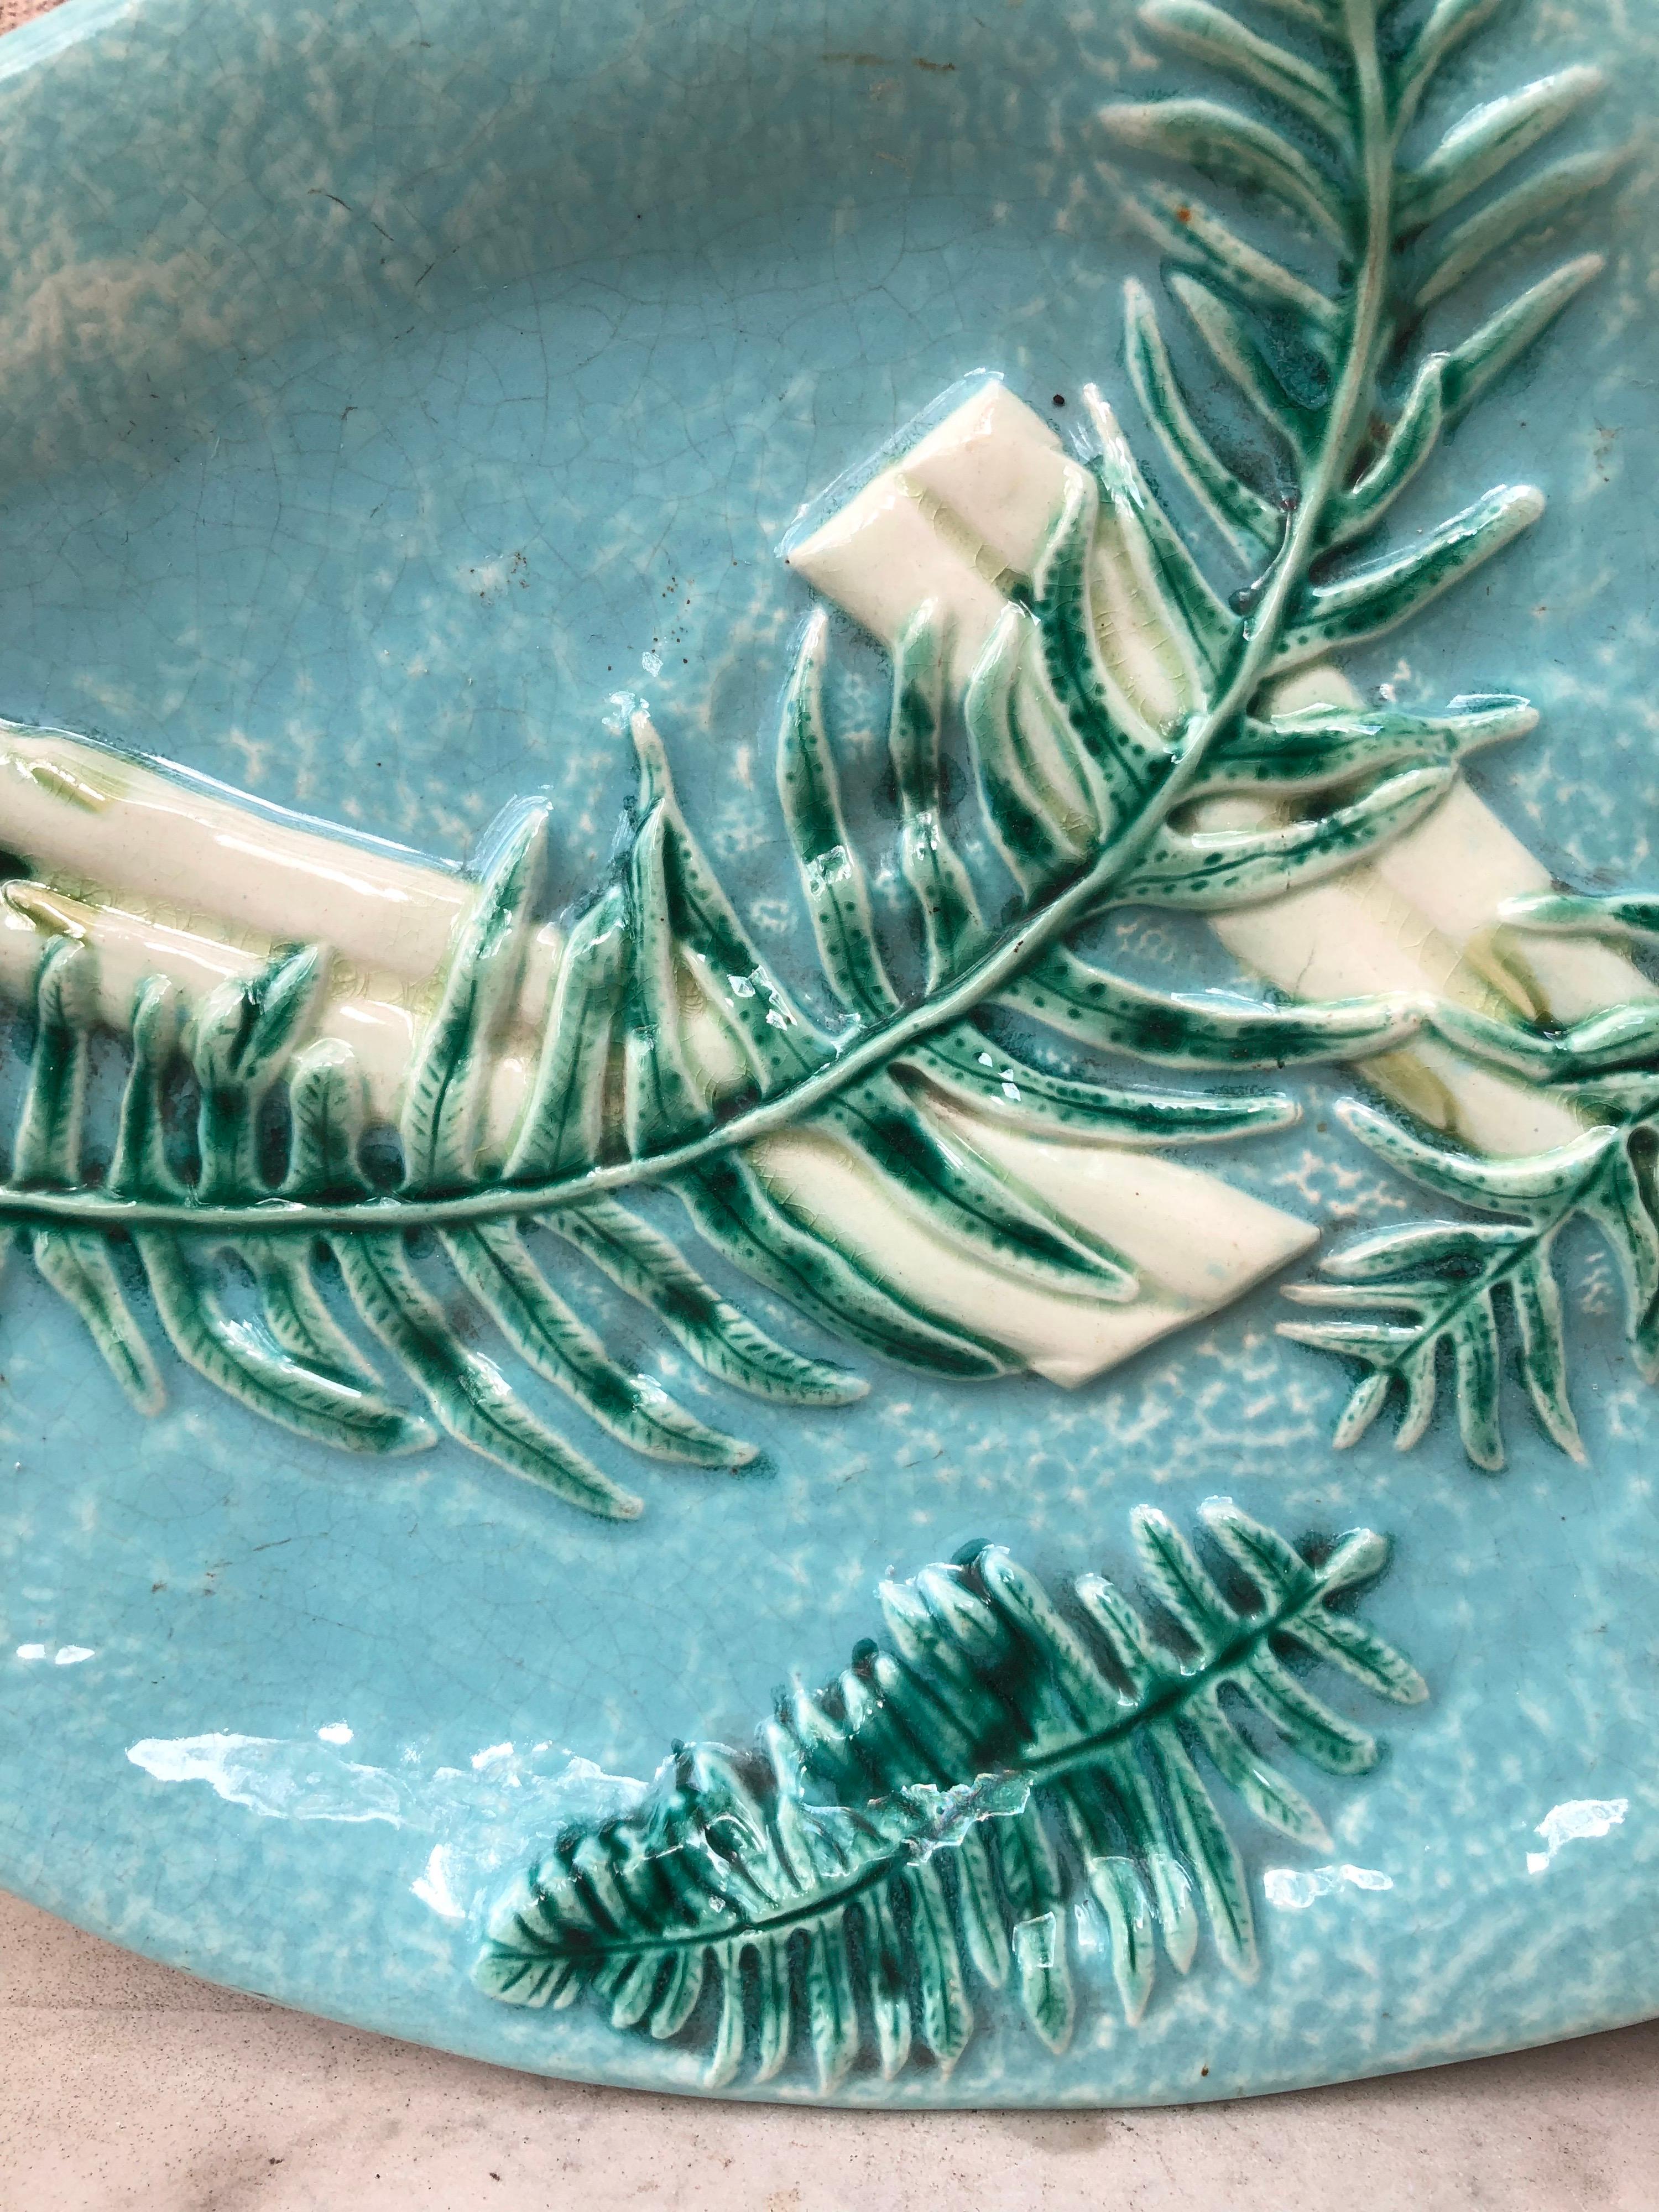 Rare Majolica Asparagus Platter with Fern Clairefontaine, circa 1880 For Sale 5